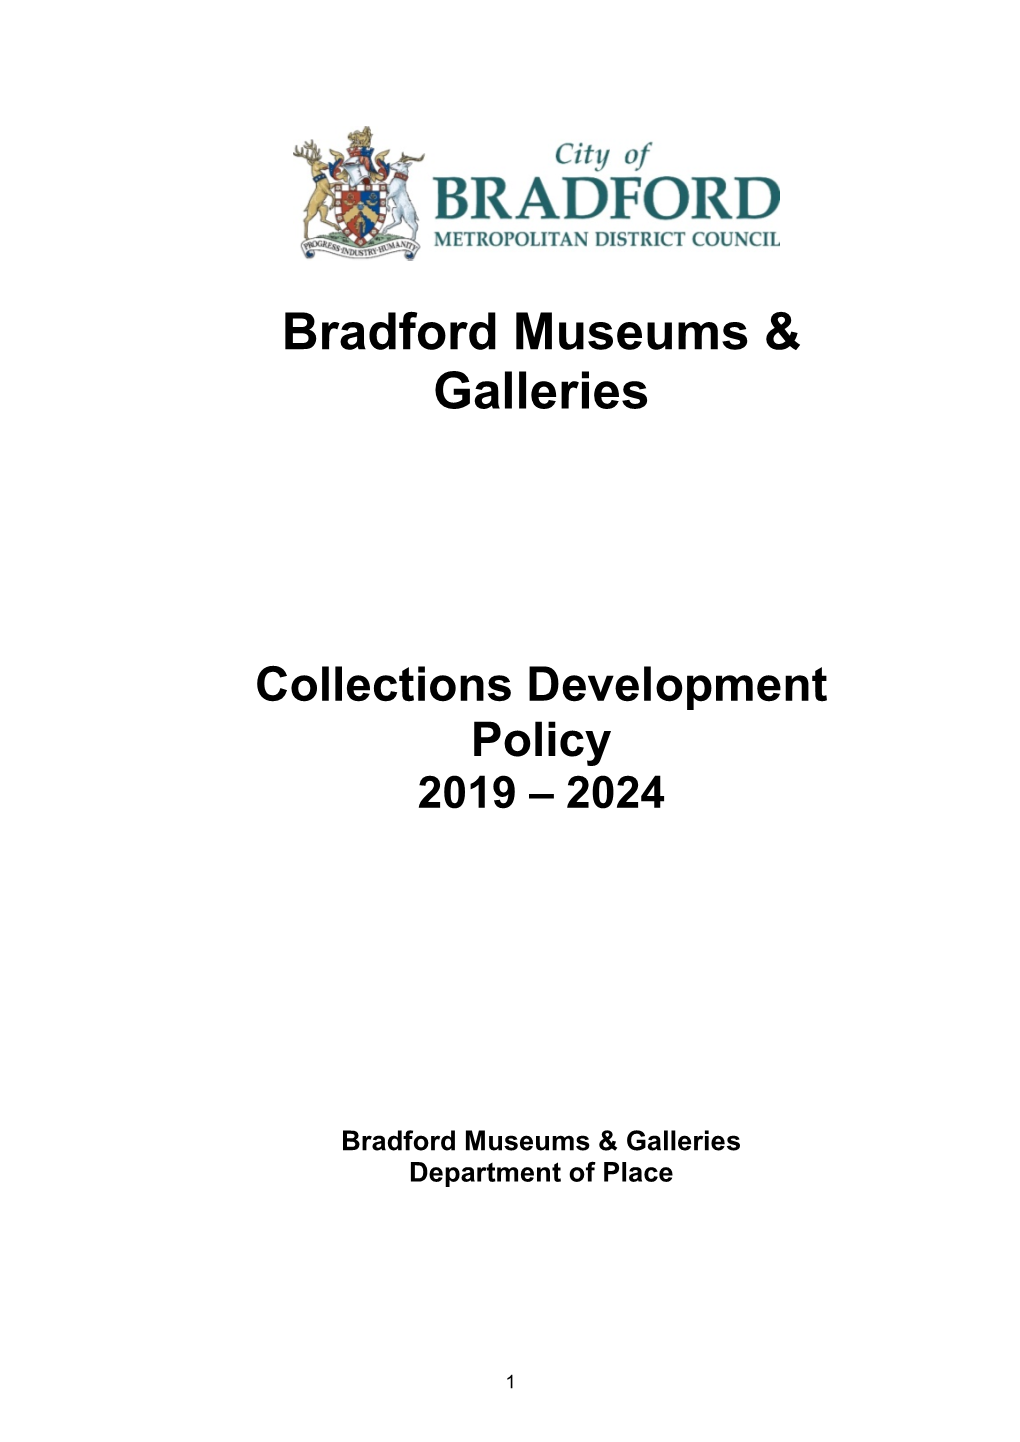 Collections Development Policy 2019 – 2024